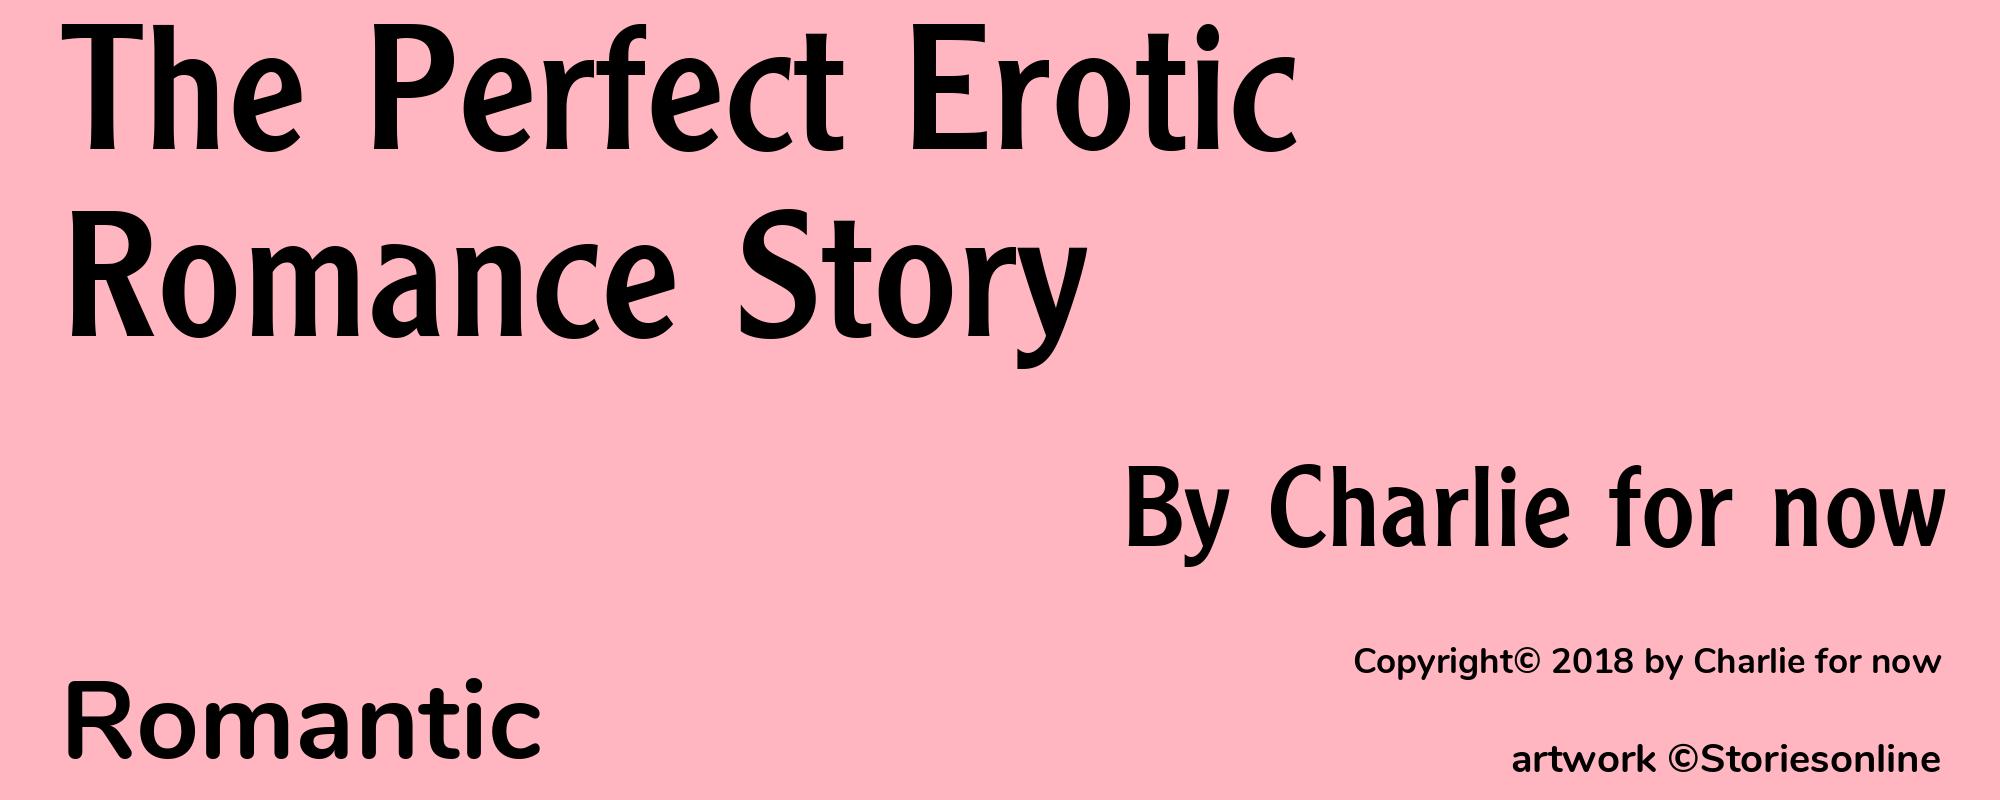 The Perfect Erotic Romance Story - Cover